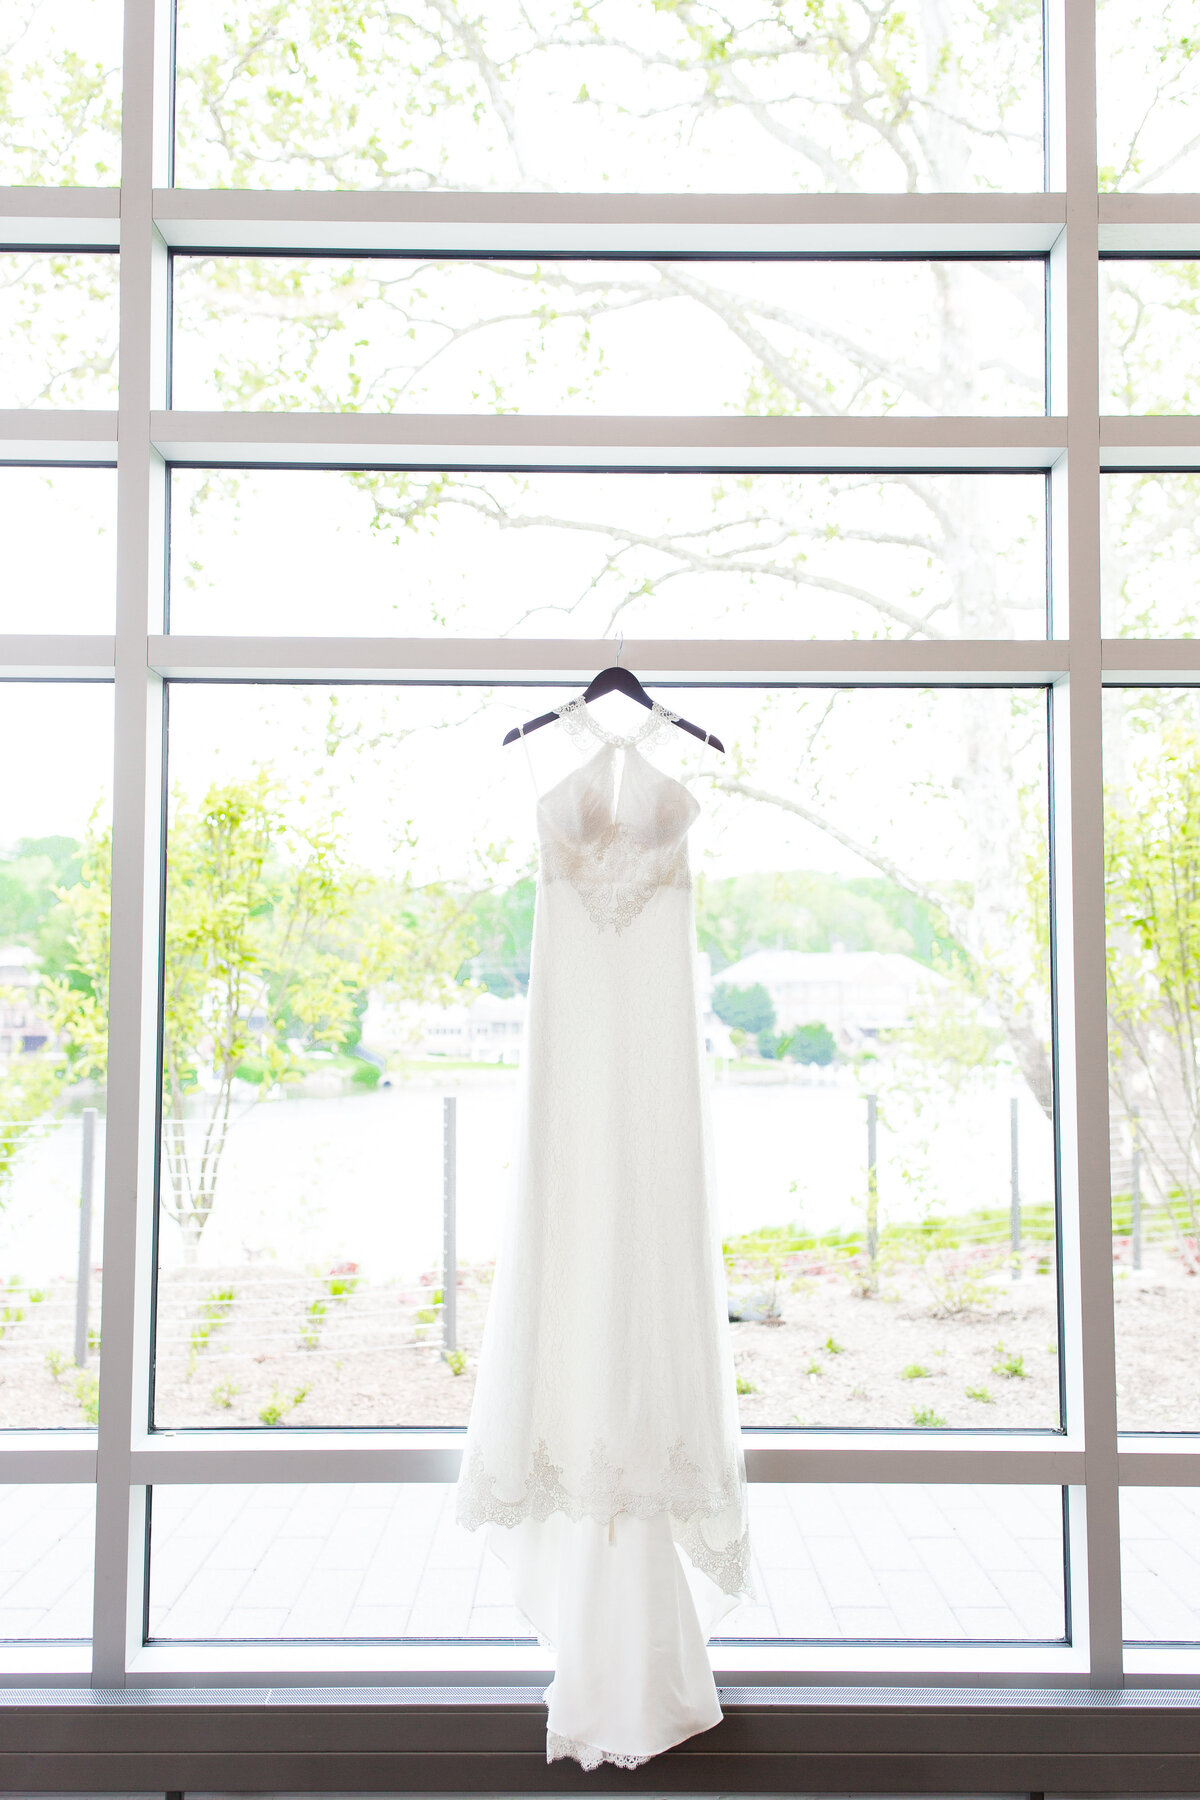 Tootie _ Kyle _ River View at Occoquan Wedding _ DC Wedding Photographer _ Taylo-0019